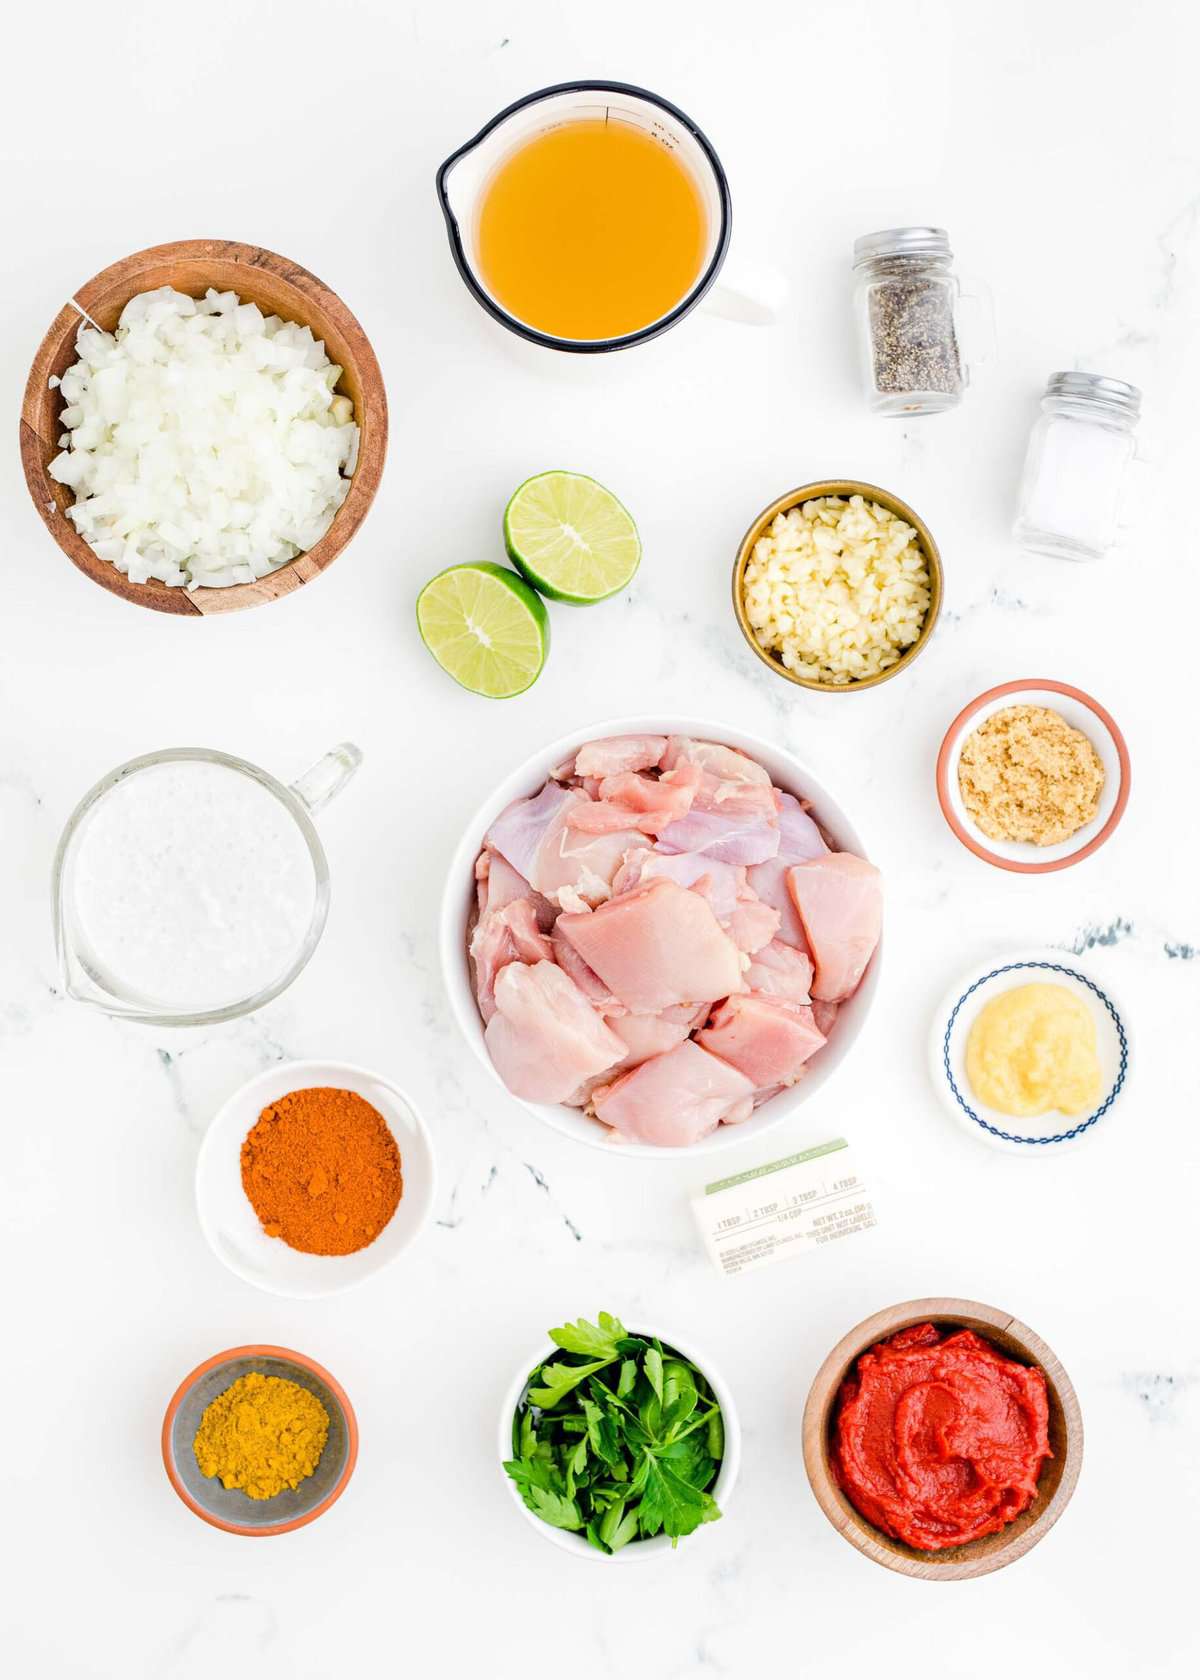 the ingredients for slow cooker butter chicken are placed on a white surface.